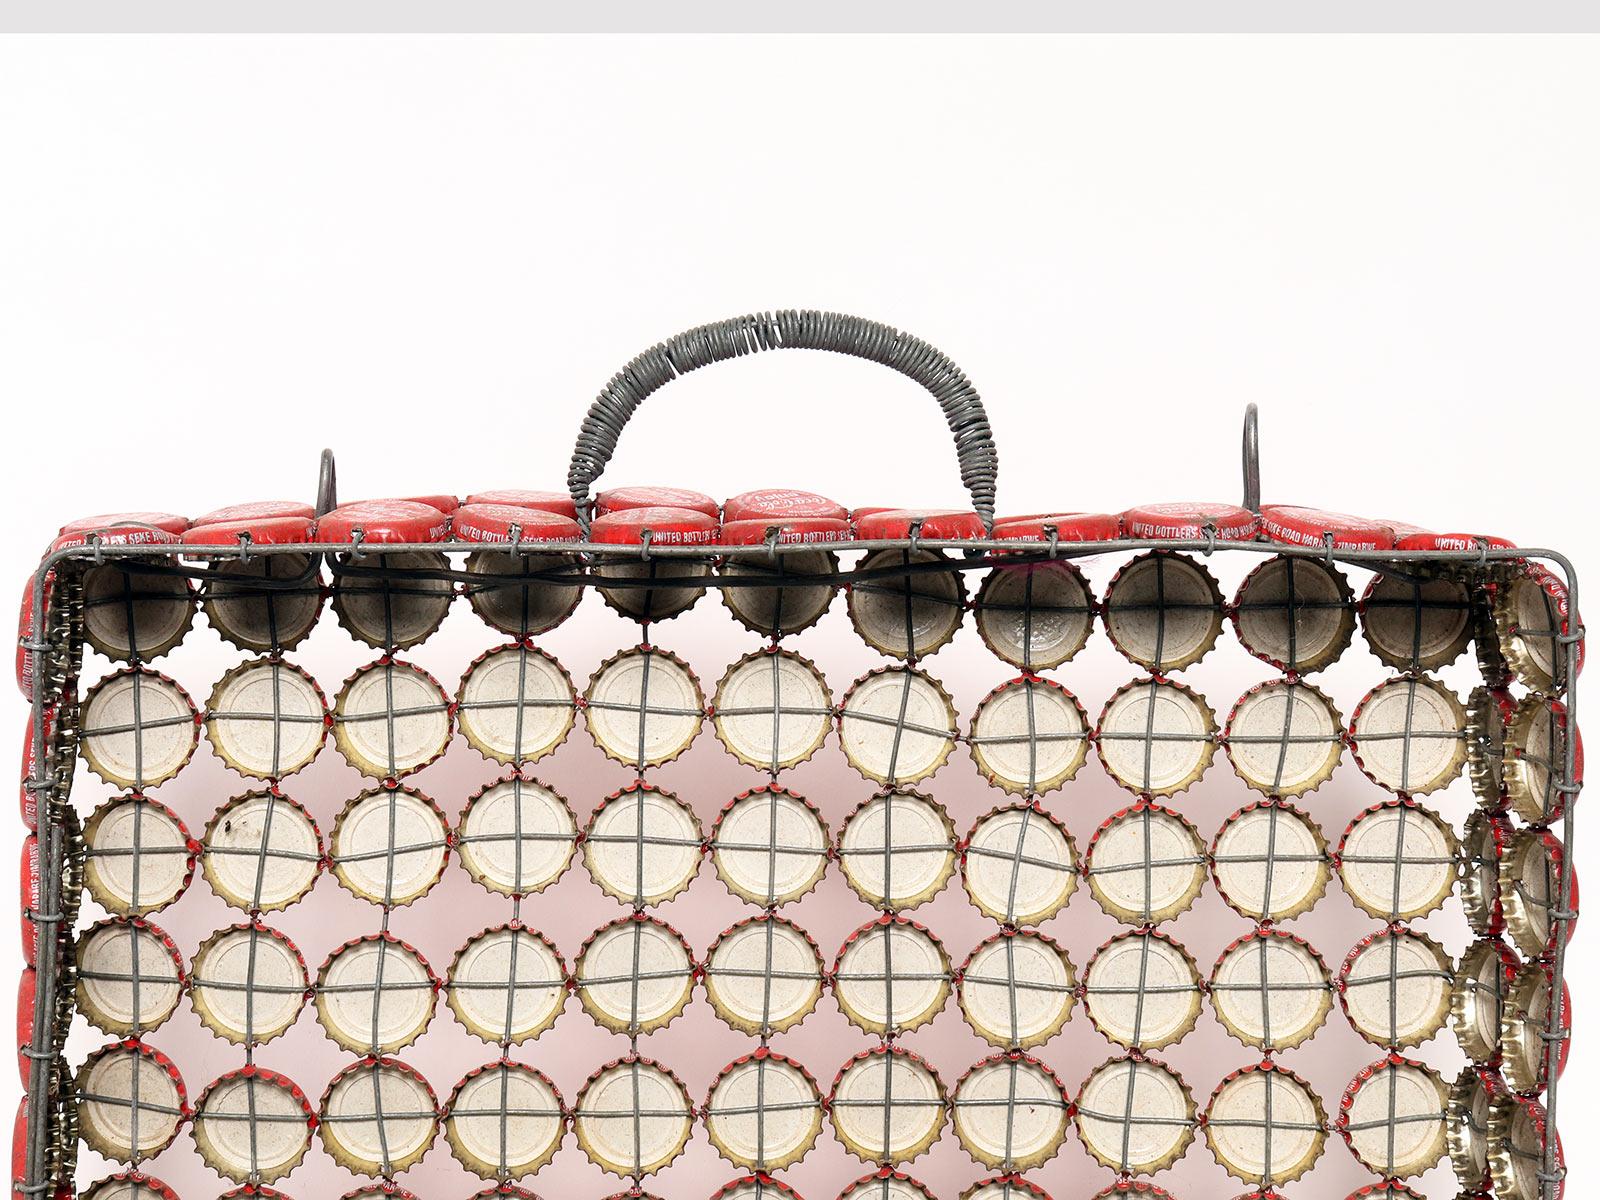 Burkinabe Folk Art Bag, Made by Coca Cola Crown Caps, Burkina Faso, Late 80’s For Sale